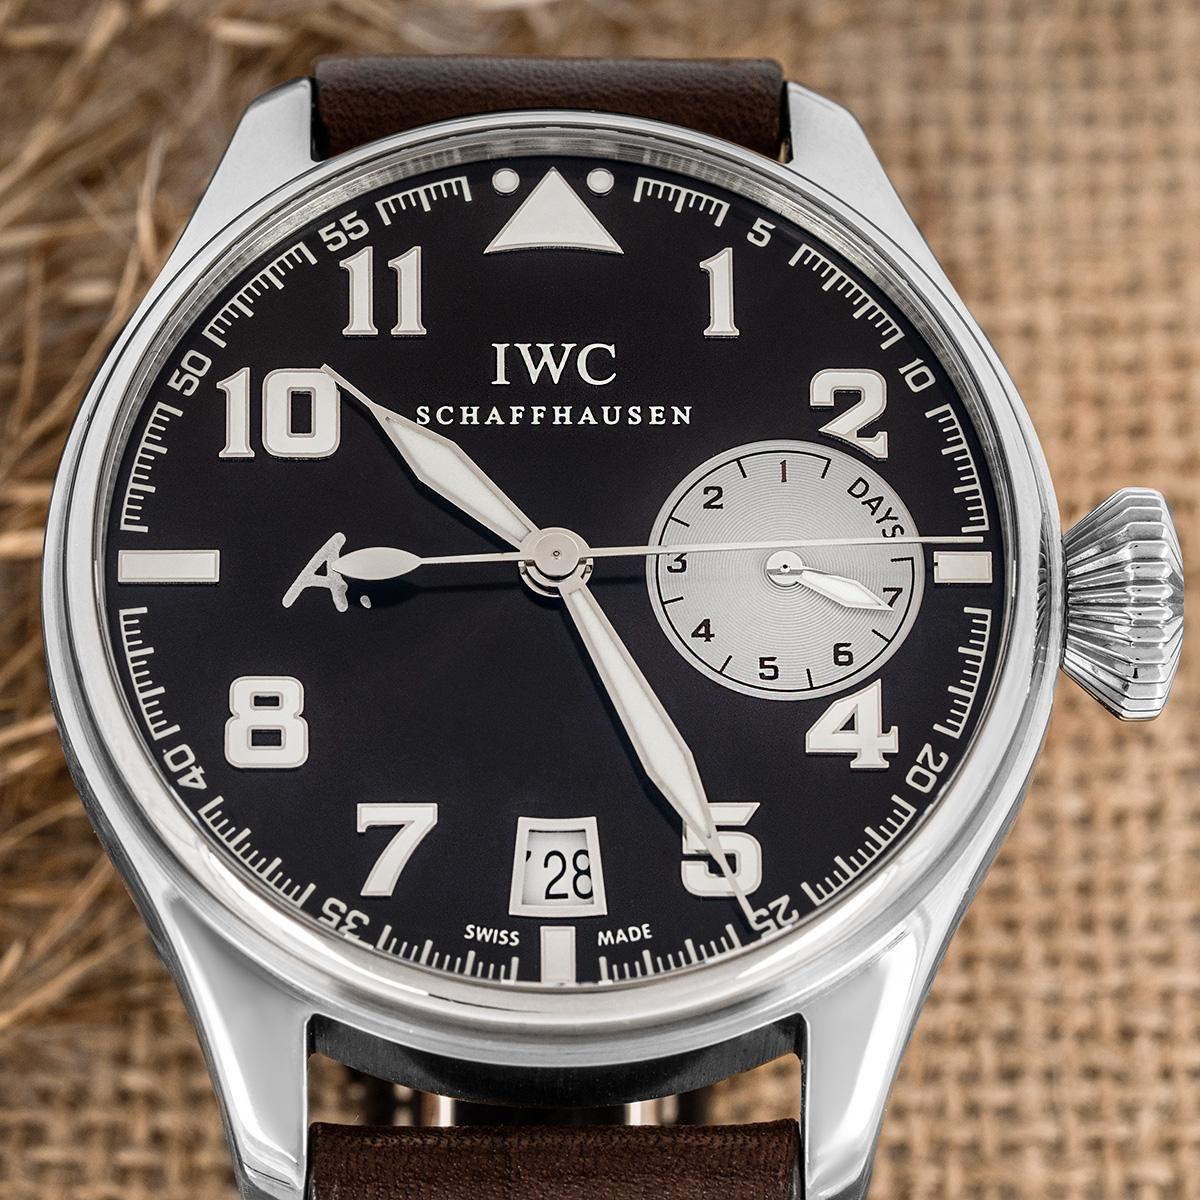 A 46mm IWC Big Pilot Saint Exupery Edition crafted in white gold. Featuring a brown dial with applied arabic numbers, a date display, a power reserve indicator and a fixed white gold bezel. Fitted with a sapphire and powered by an automatic